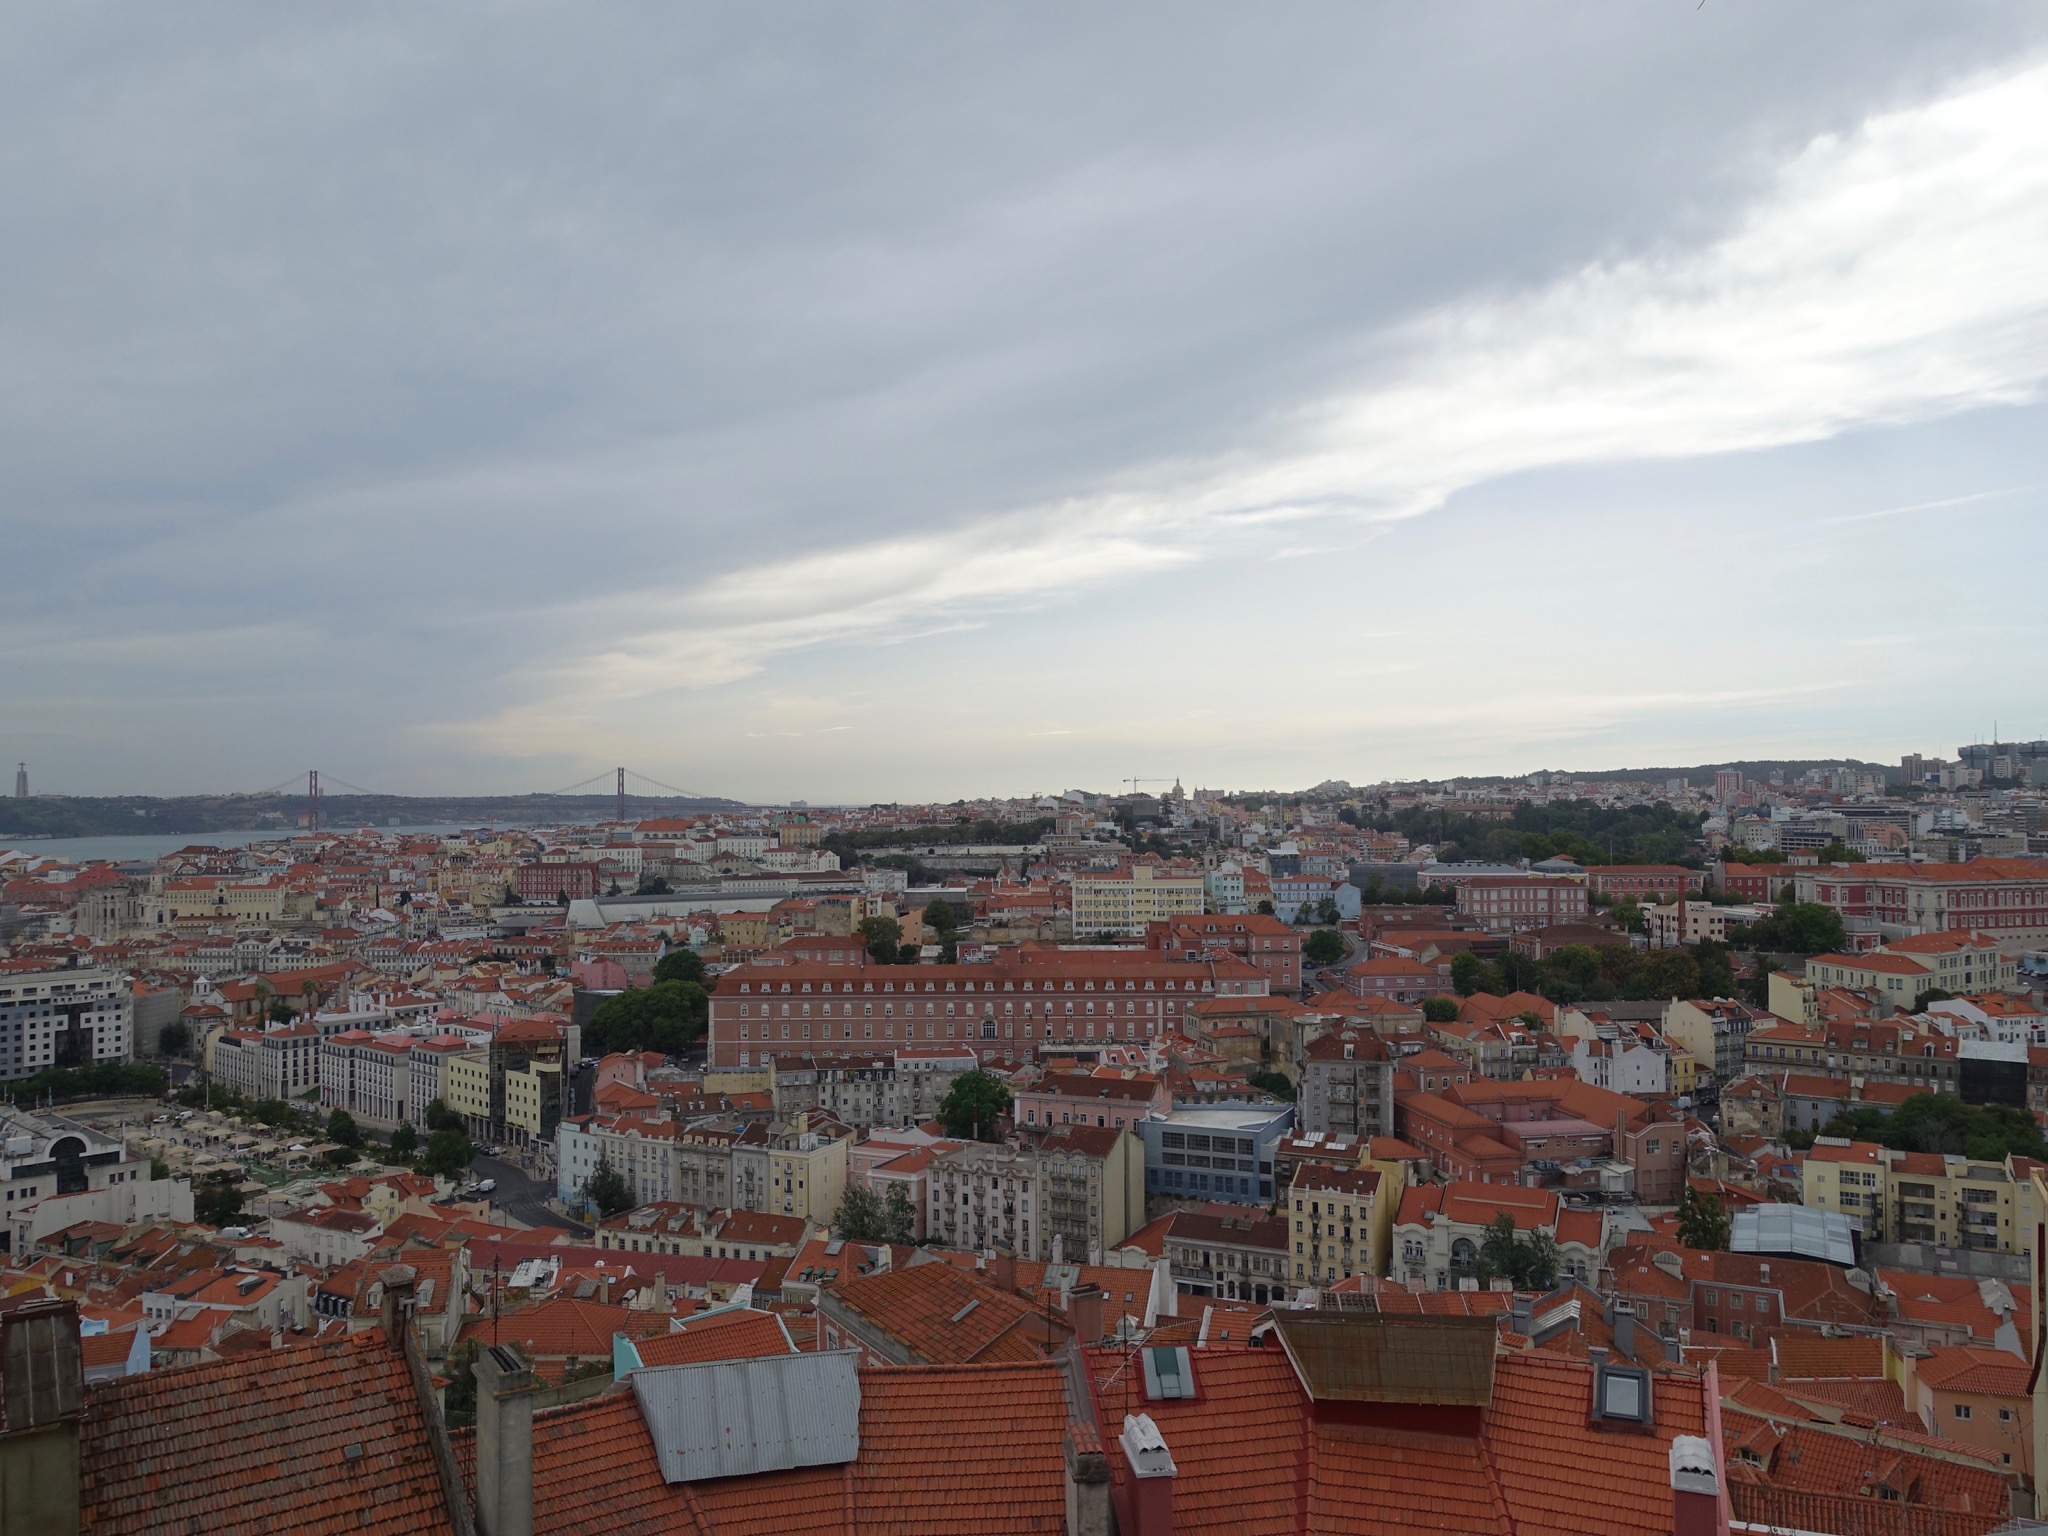 Photo 7 of 86 from the album Highlights Lisbon 2015.